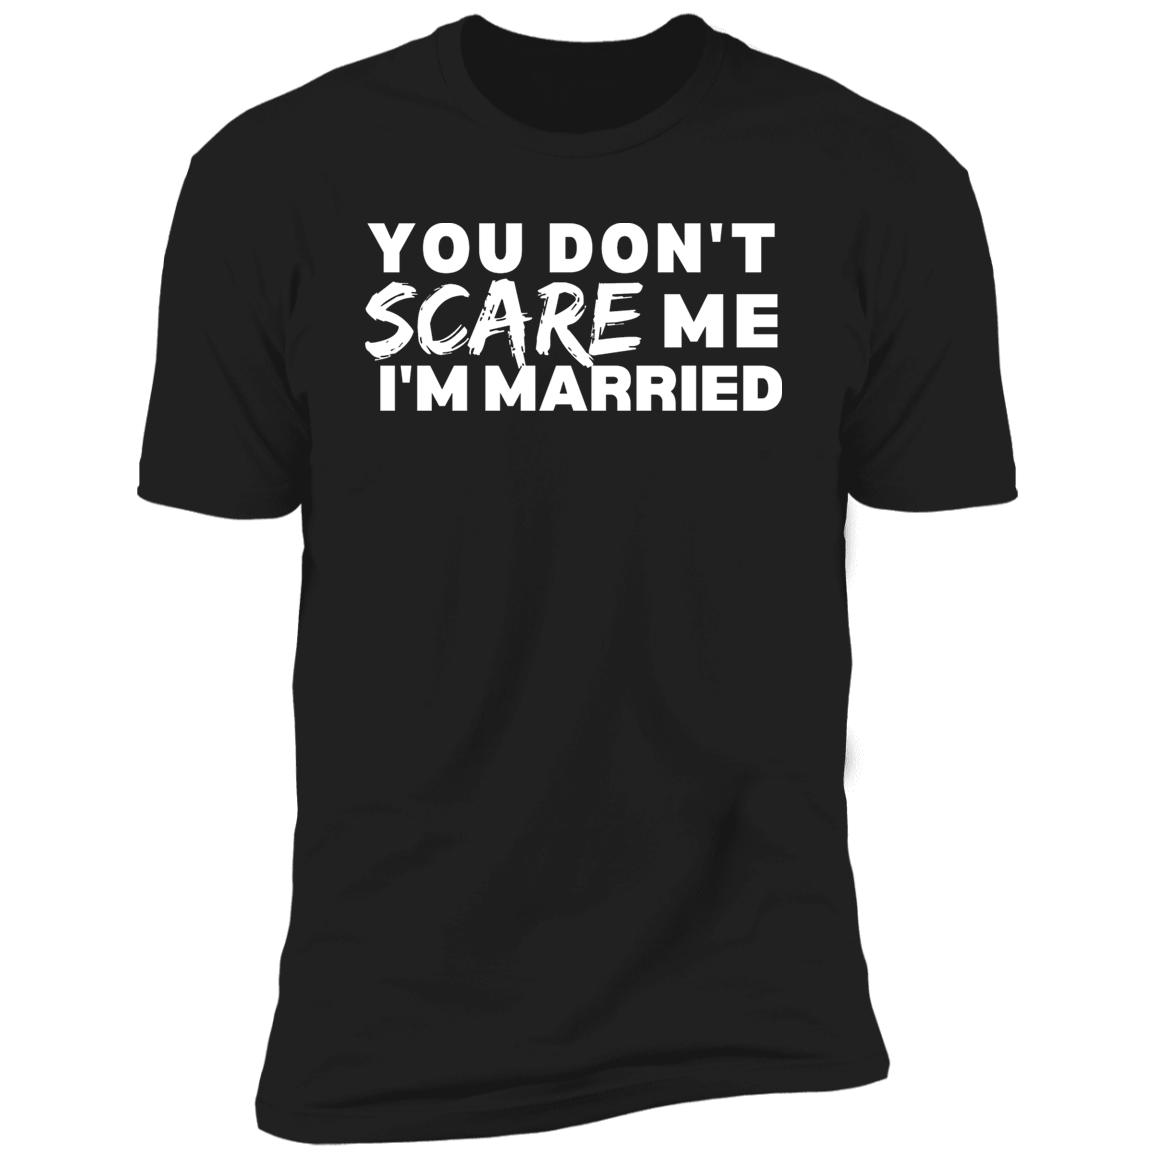 Don't Scare Me | Married (T-Shirt)